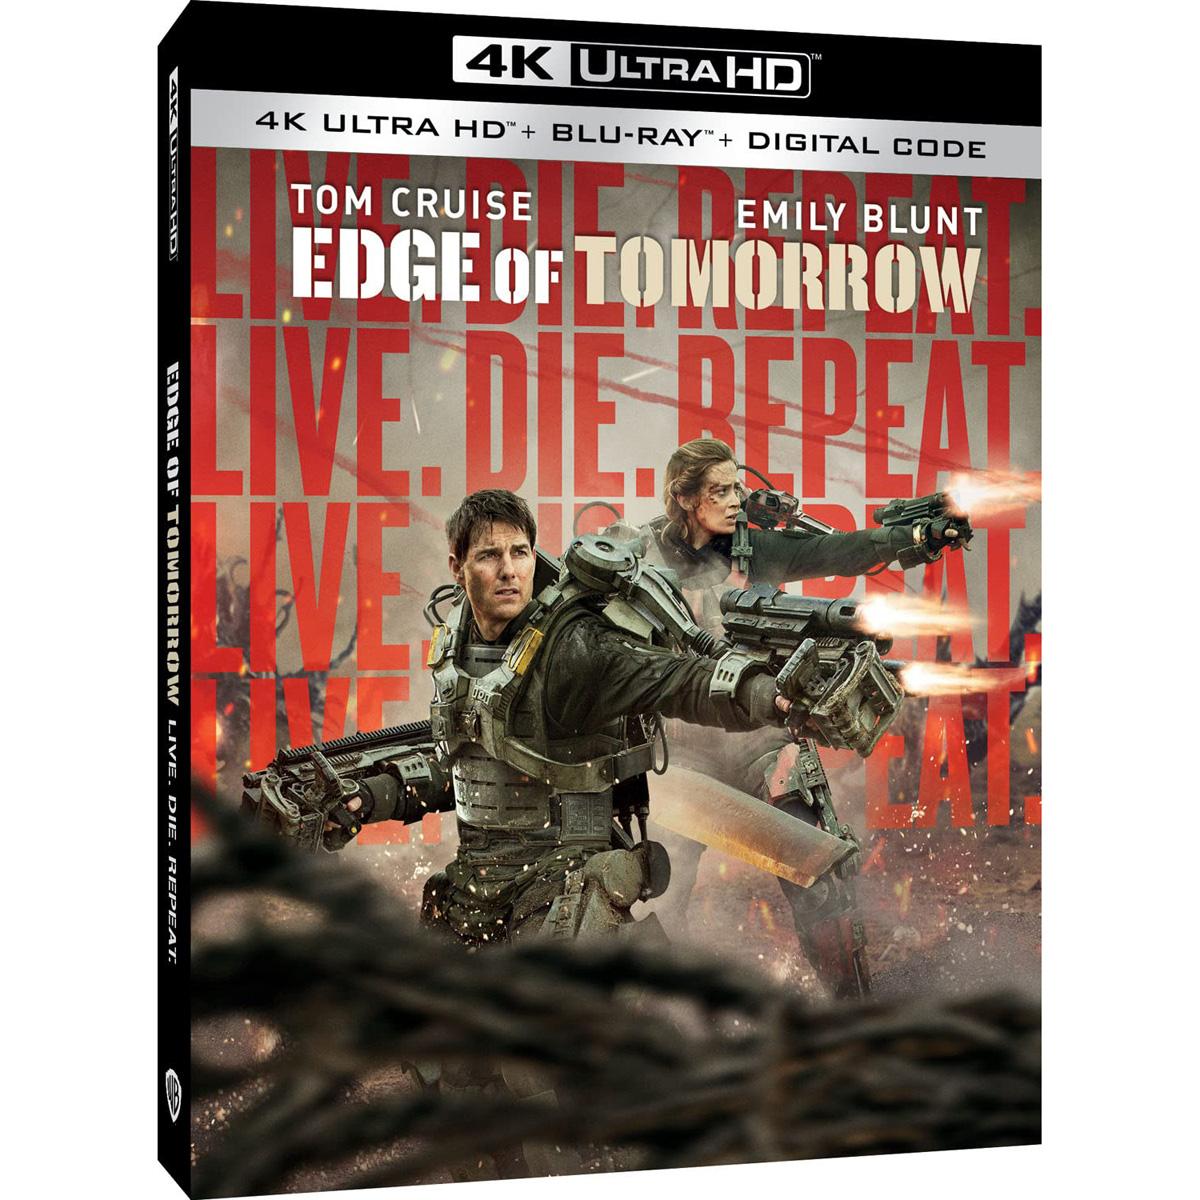 Live Die Repeat Edge of Tomorrow 4K UHD + Blu-ray for $9.99